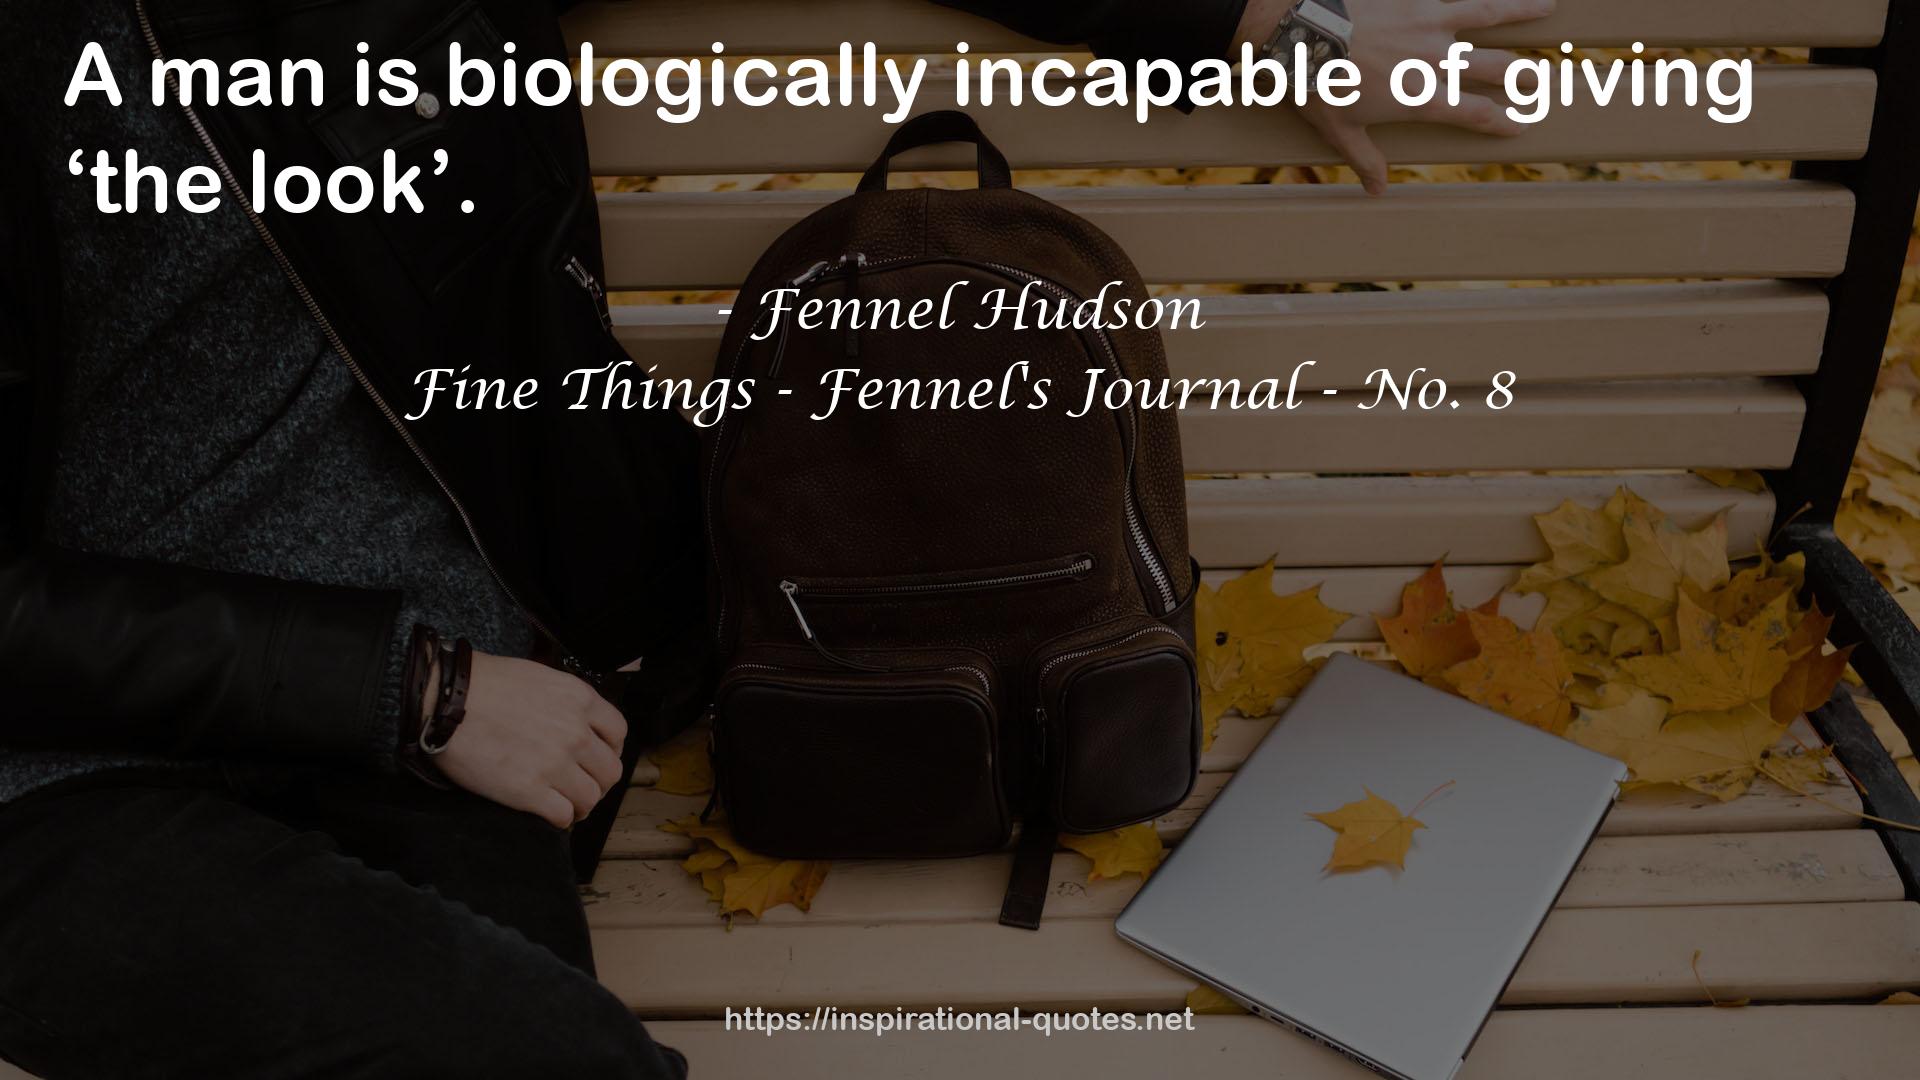 Fine Things - Fennel's Journal - No. 8 QUOTES